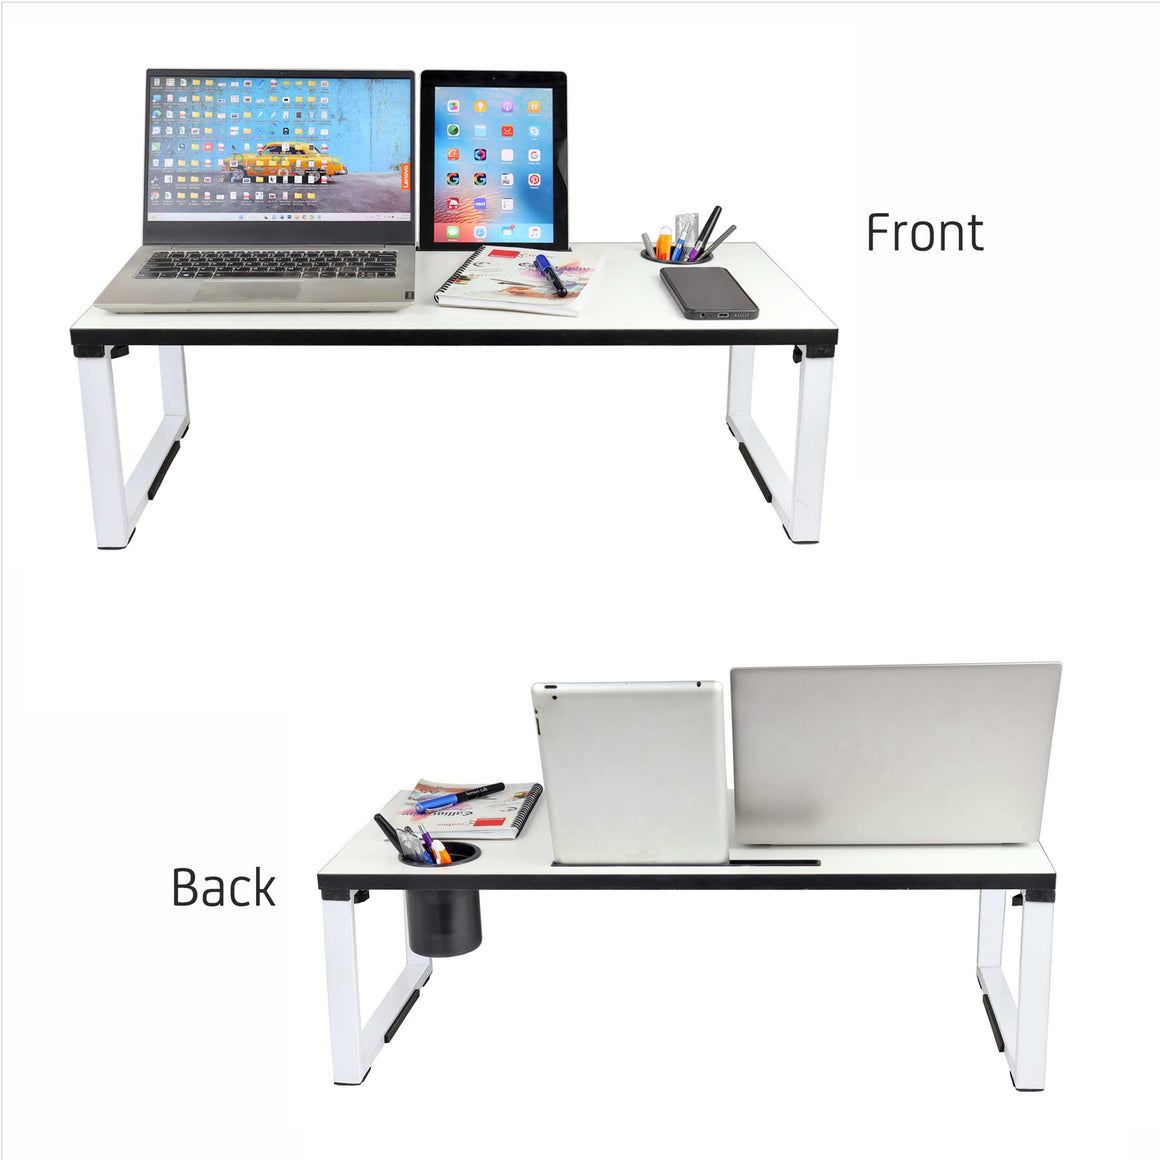 Isomars Bed Desk/Floor Desk Laptop Study Table for Work from Home, Online Classes, Card Games and Kid's Activities (White)